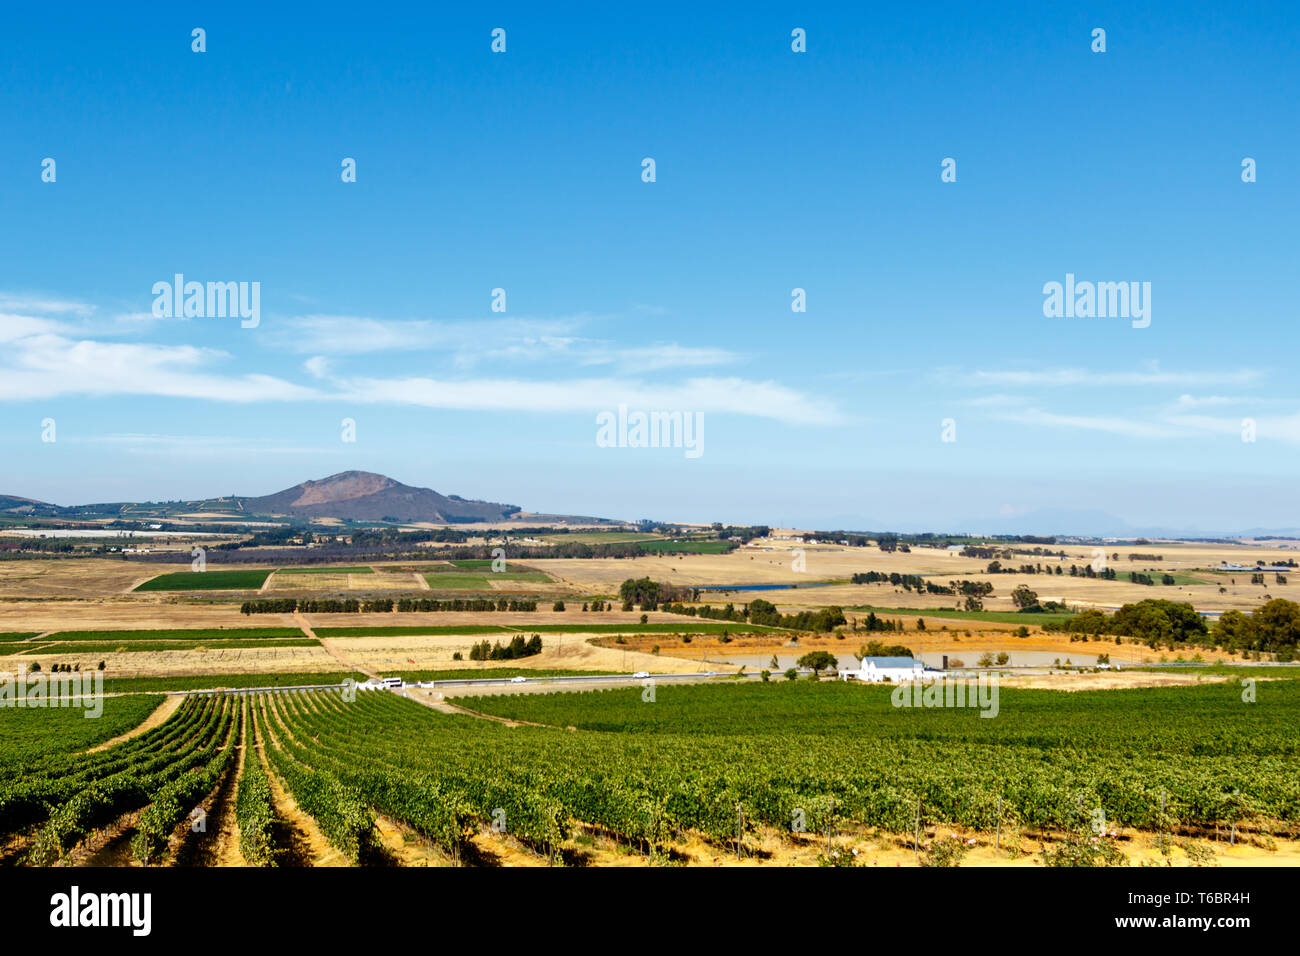 Citrus bush field with the mountain view Stock Photo